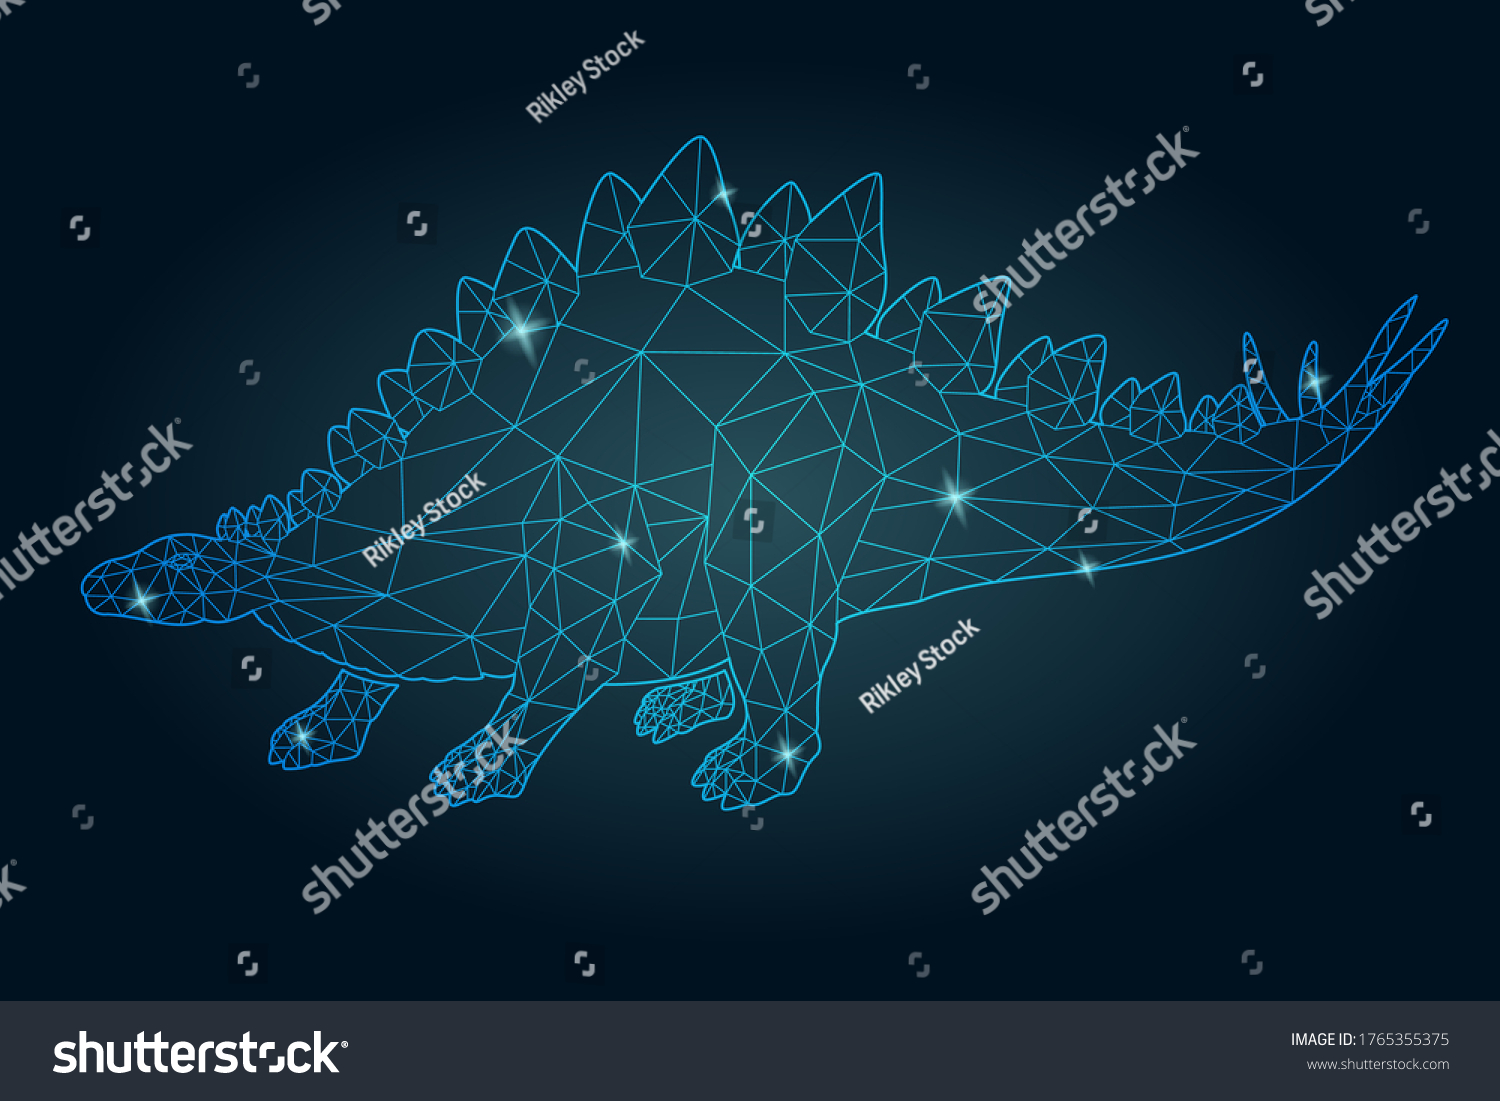 SVG of Beautiful cosmic low poly illustration with shiny blue stegosaurus silhouette on the dark background svg